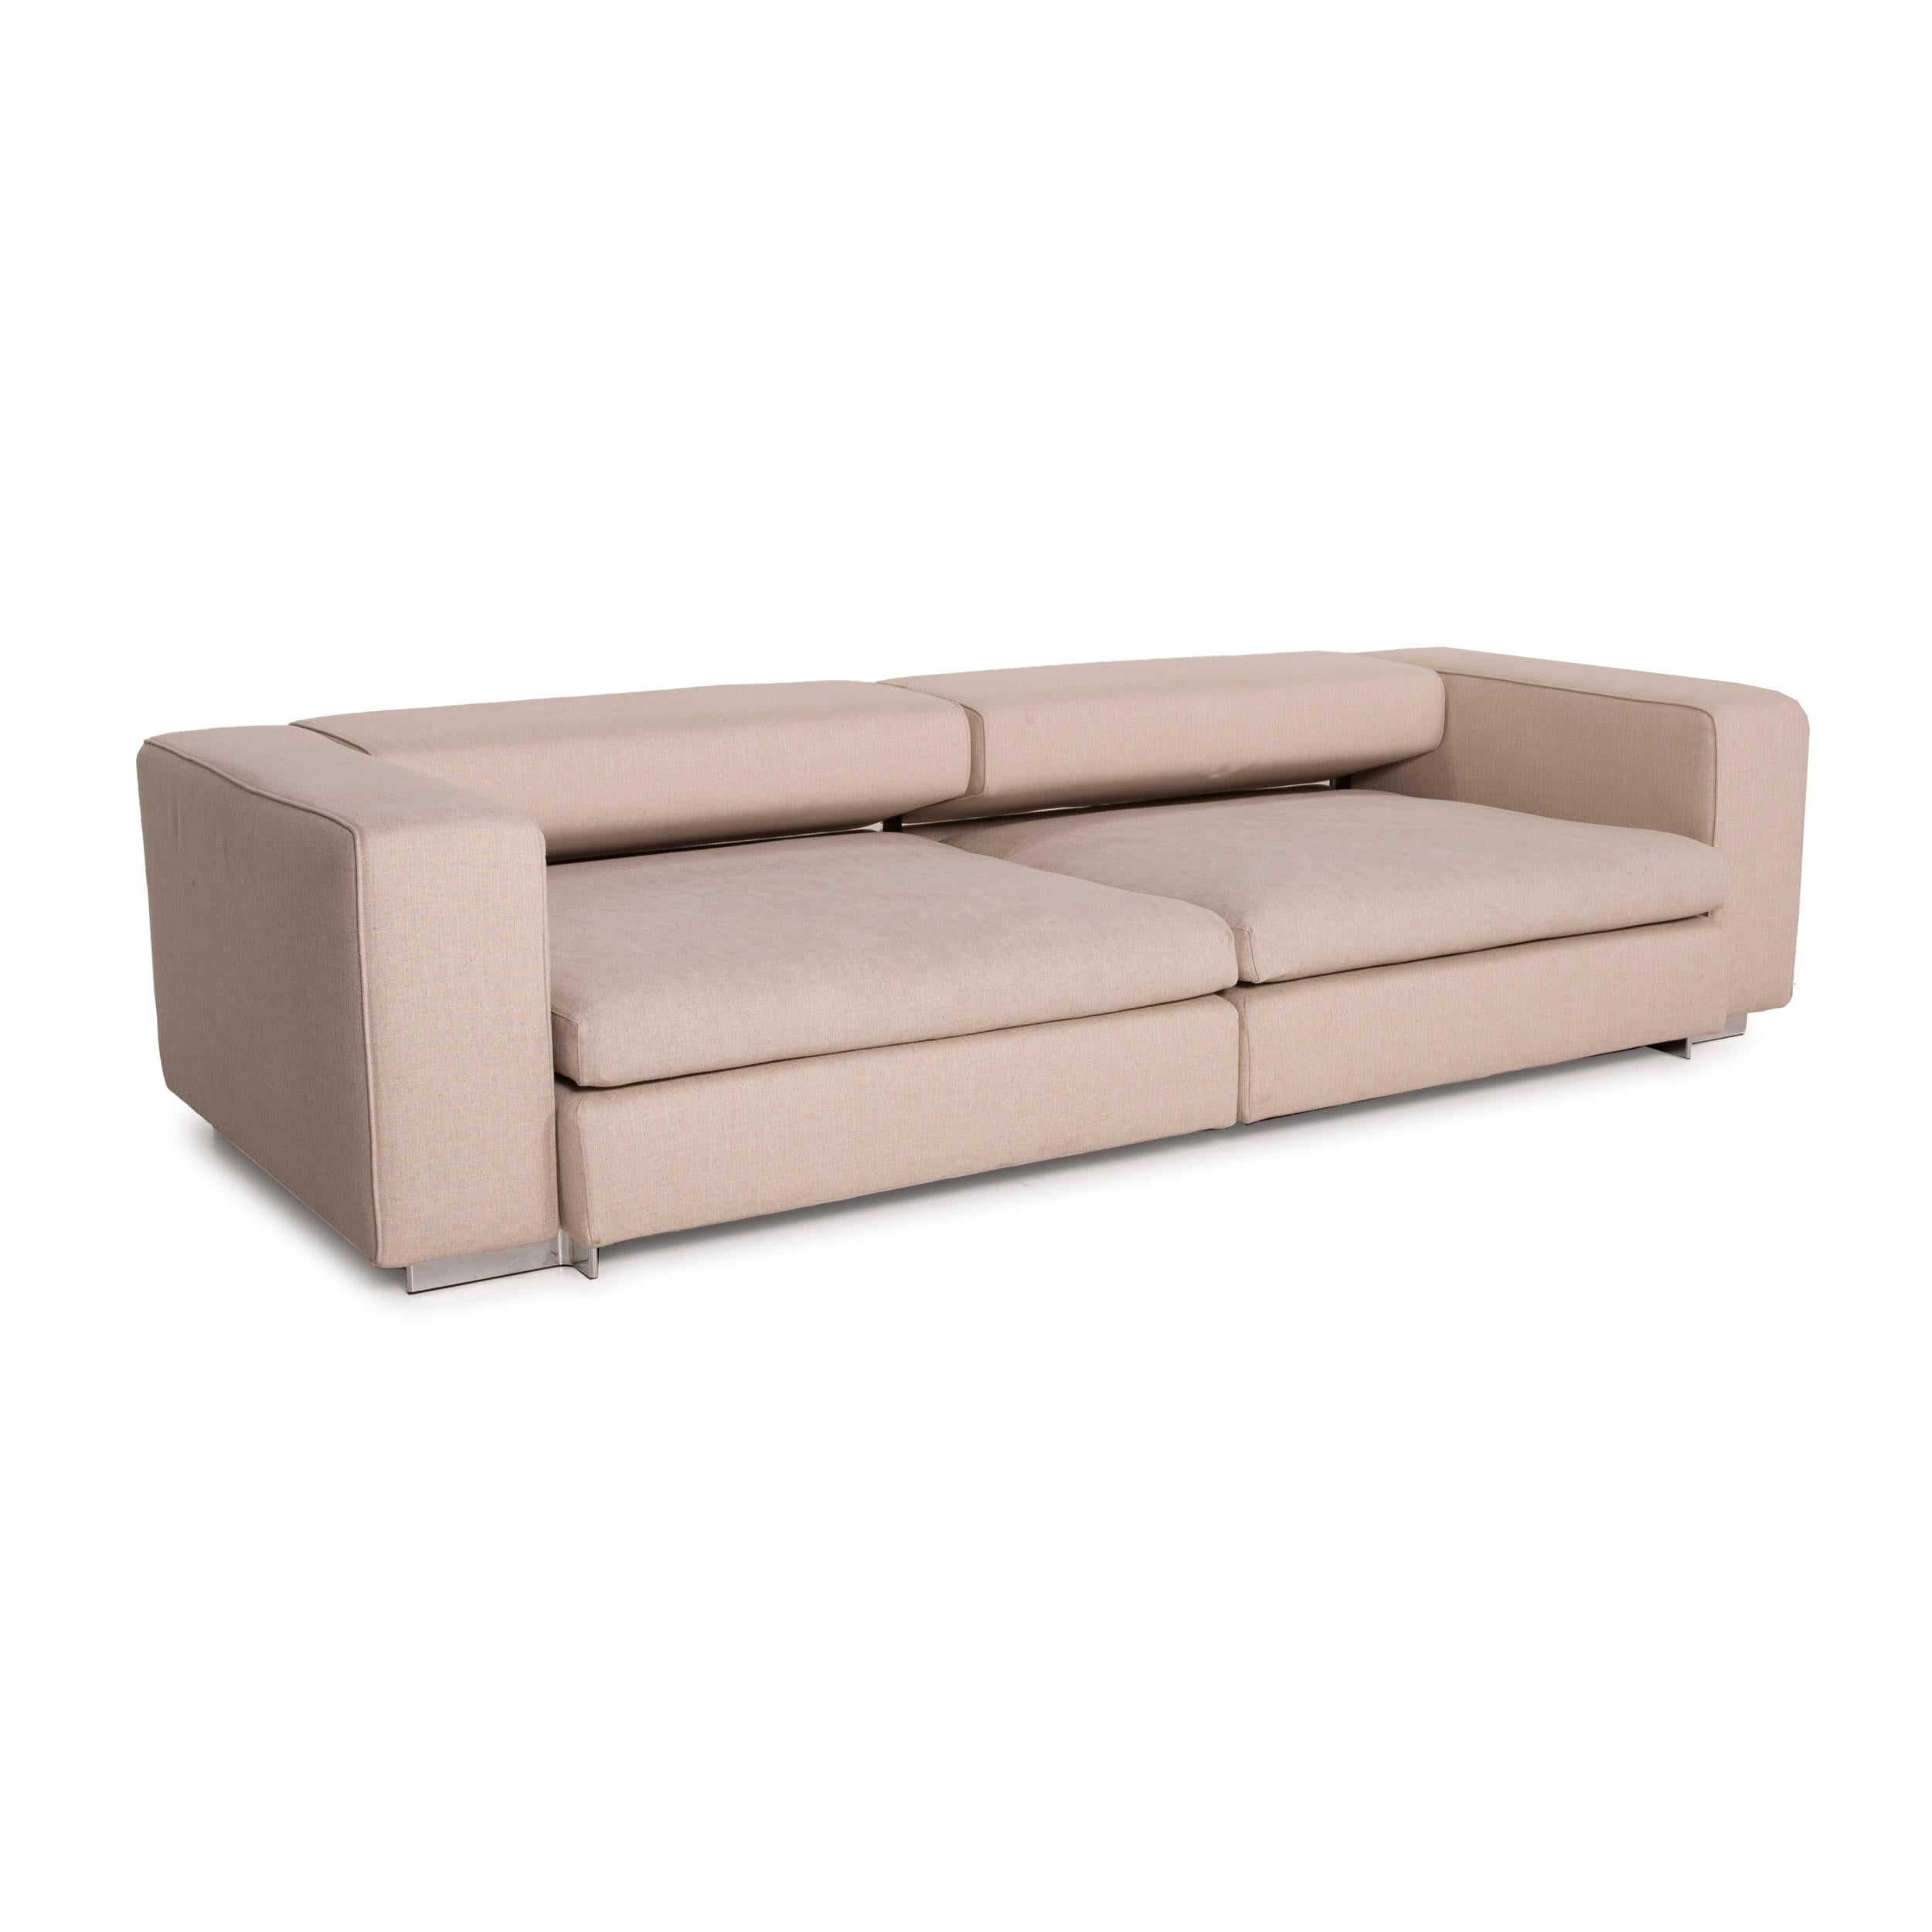 Molteni Turner Fabric Sofa Beige Two-Seater Function In Excellent Condition For Sale In Cologne, DE